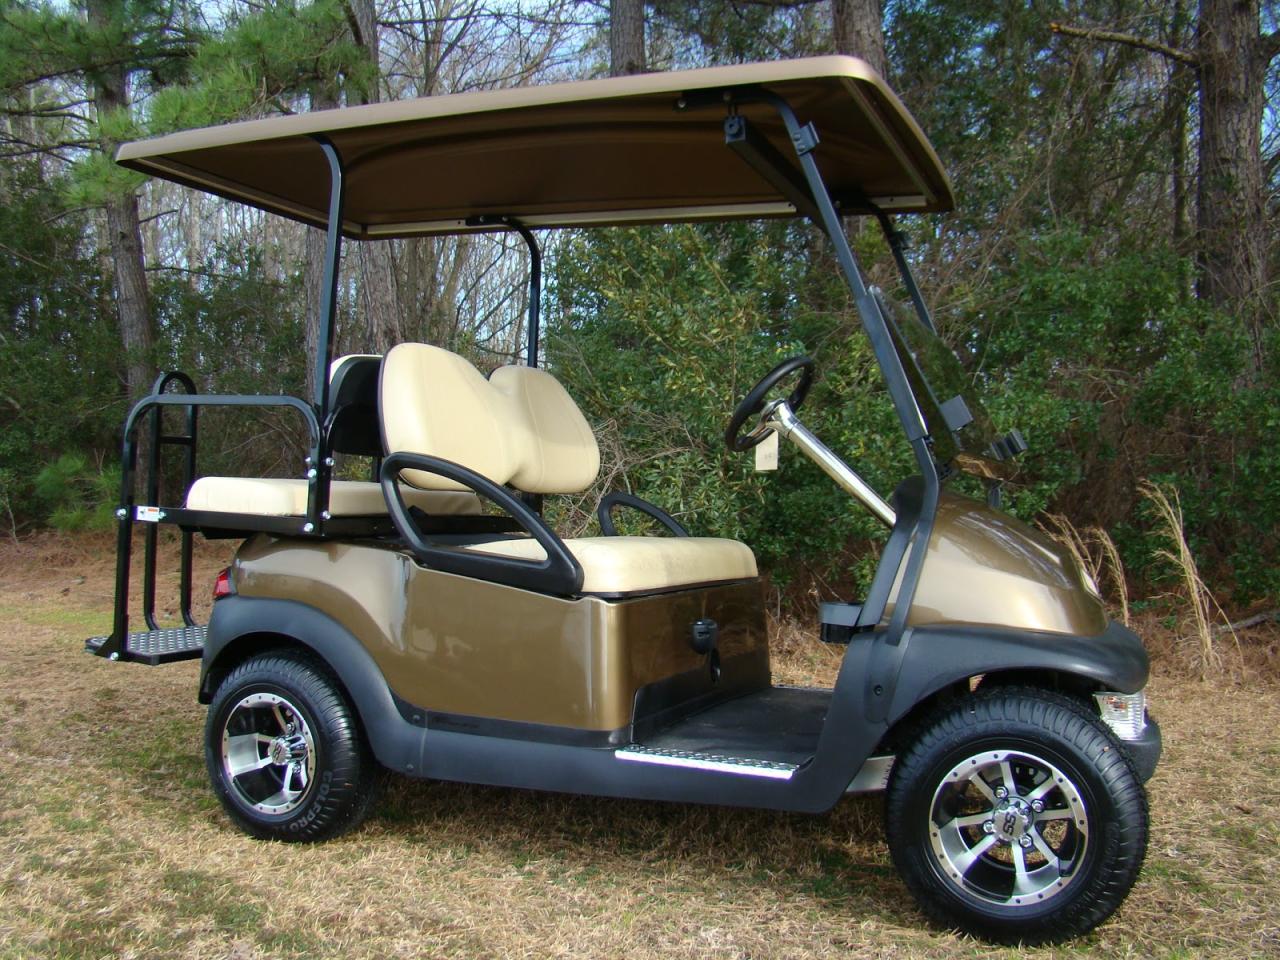 Used Golf Carts for Sale by Owner in Monroe, Michigan: Find Your Perfect Ride Today!